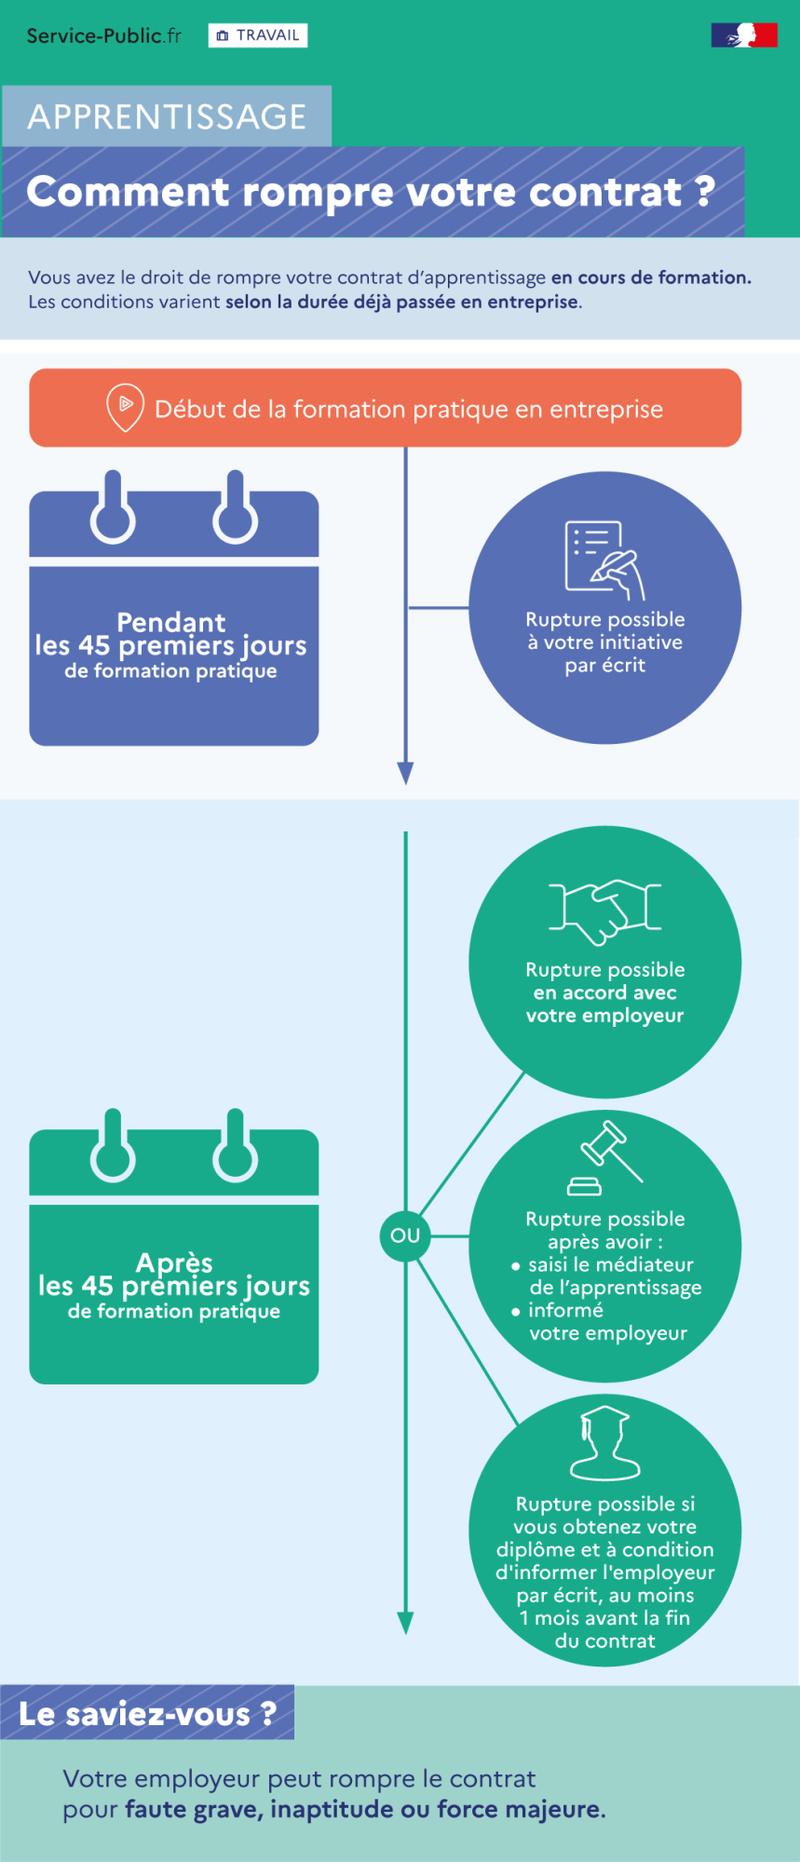 Synthesise the types of breach of the apprenticeship contract by the apprentice. - How do I break the learning contract? - plus de détails dans le texte suivant l’infographie